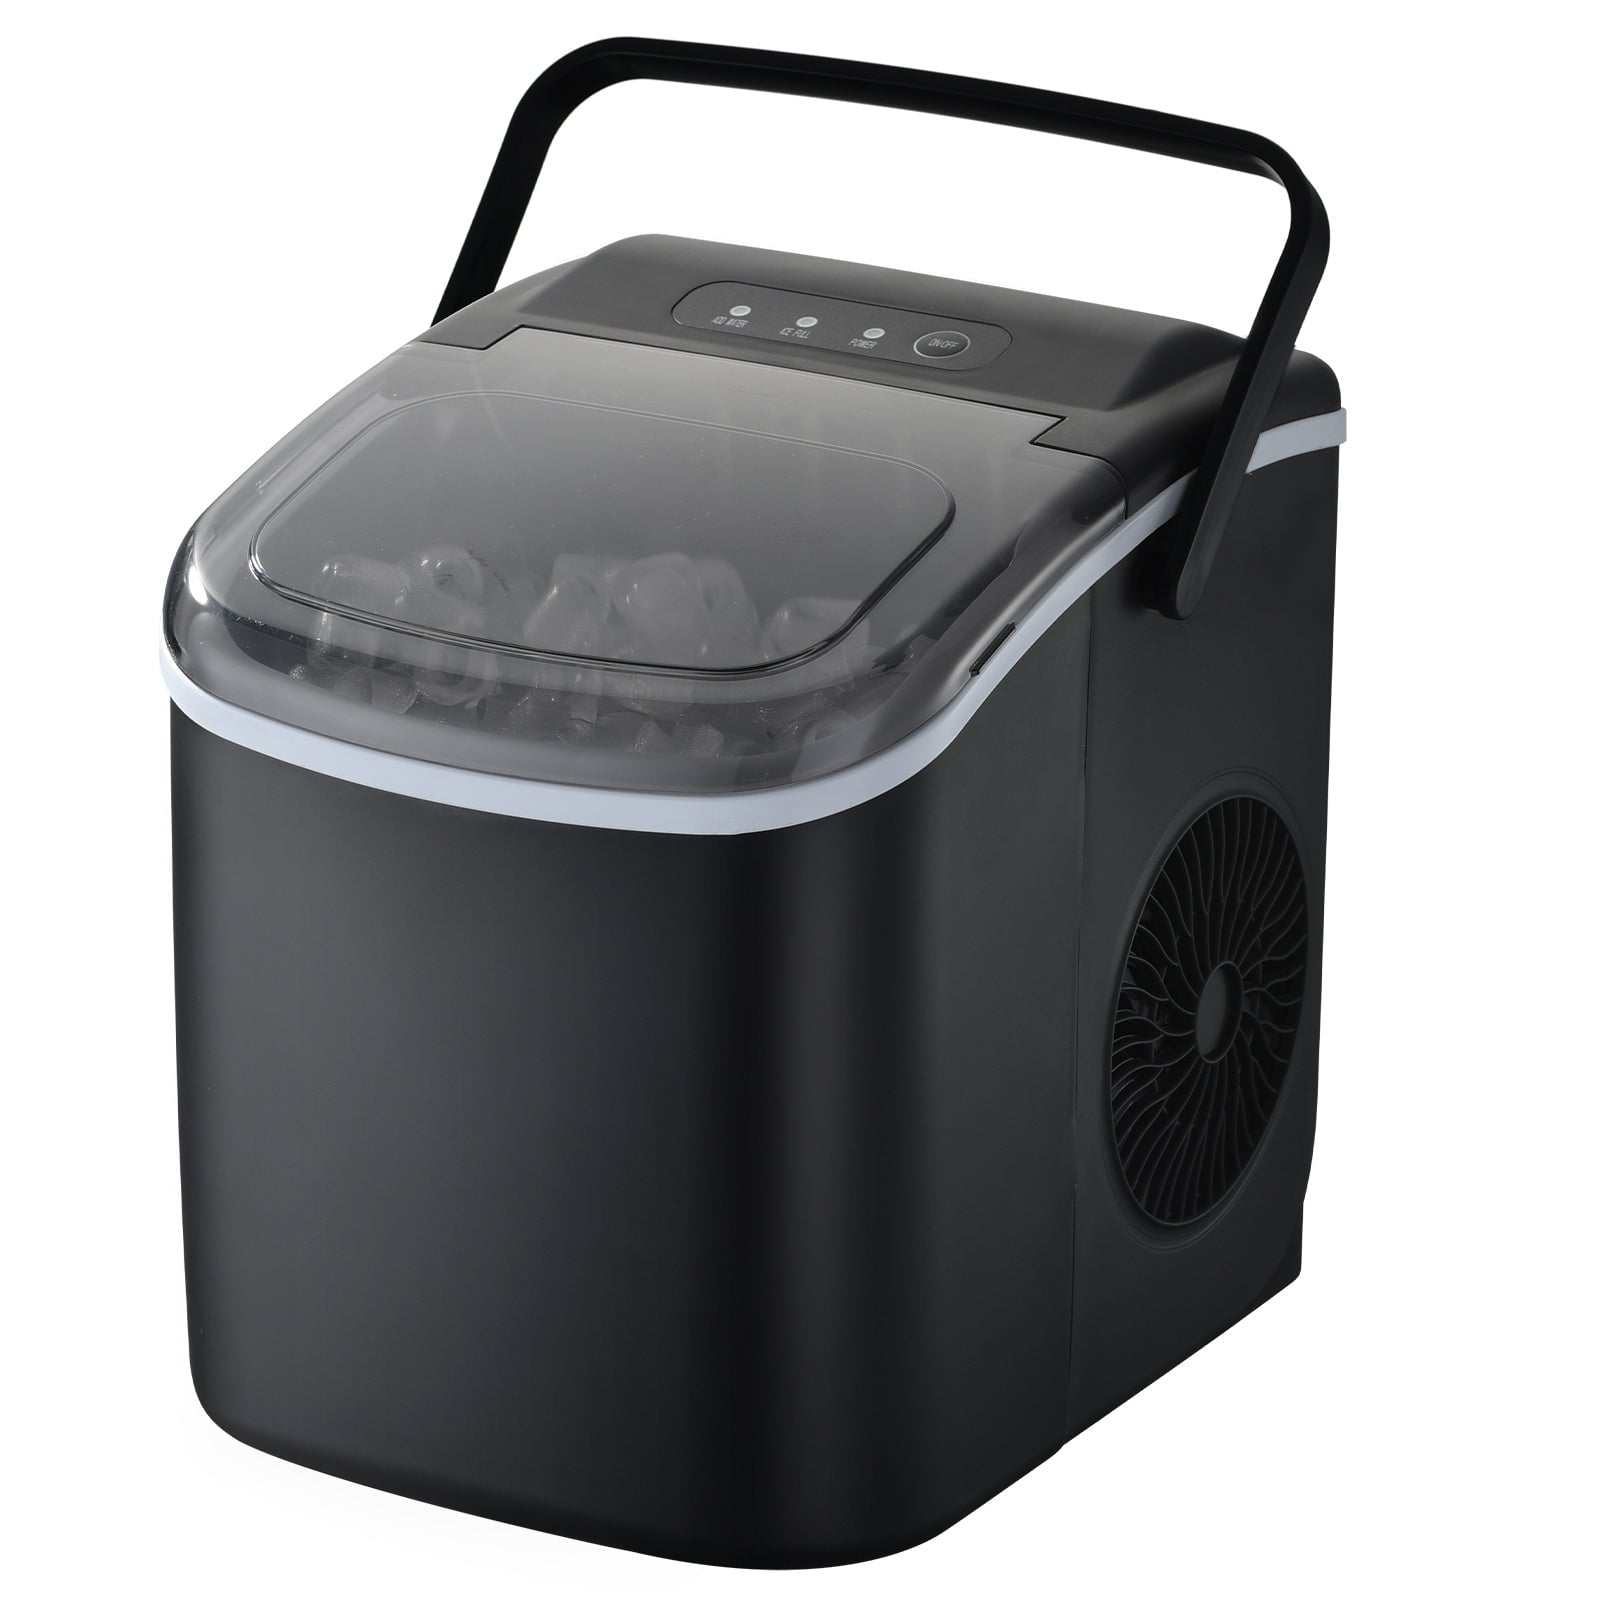 Self-Cleaning Countertop Ice Maker Only $82.87 Shipped on